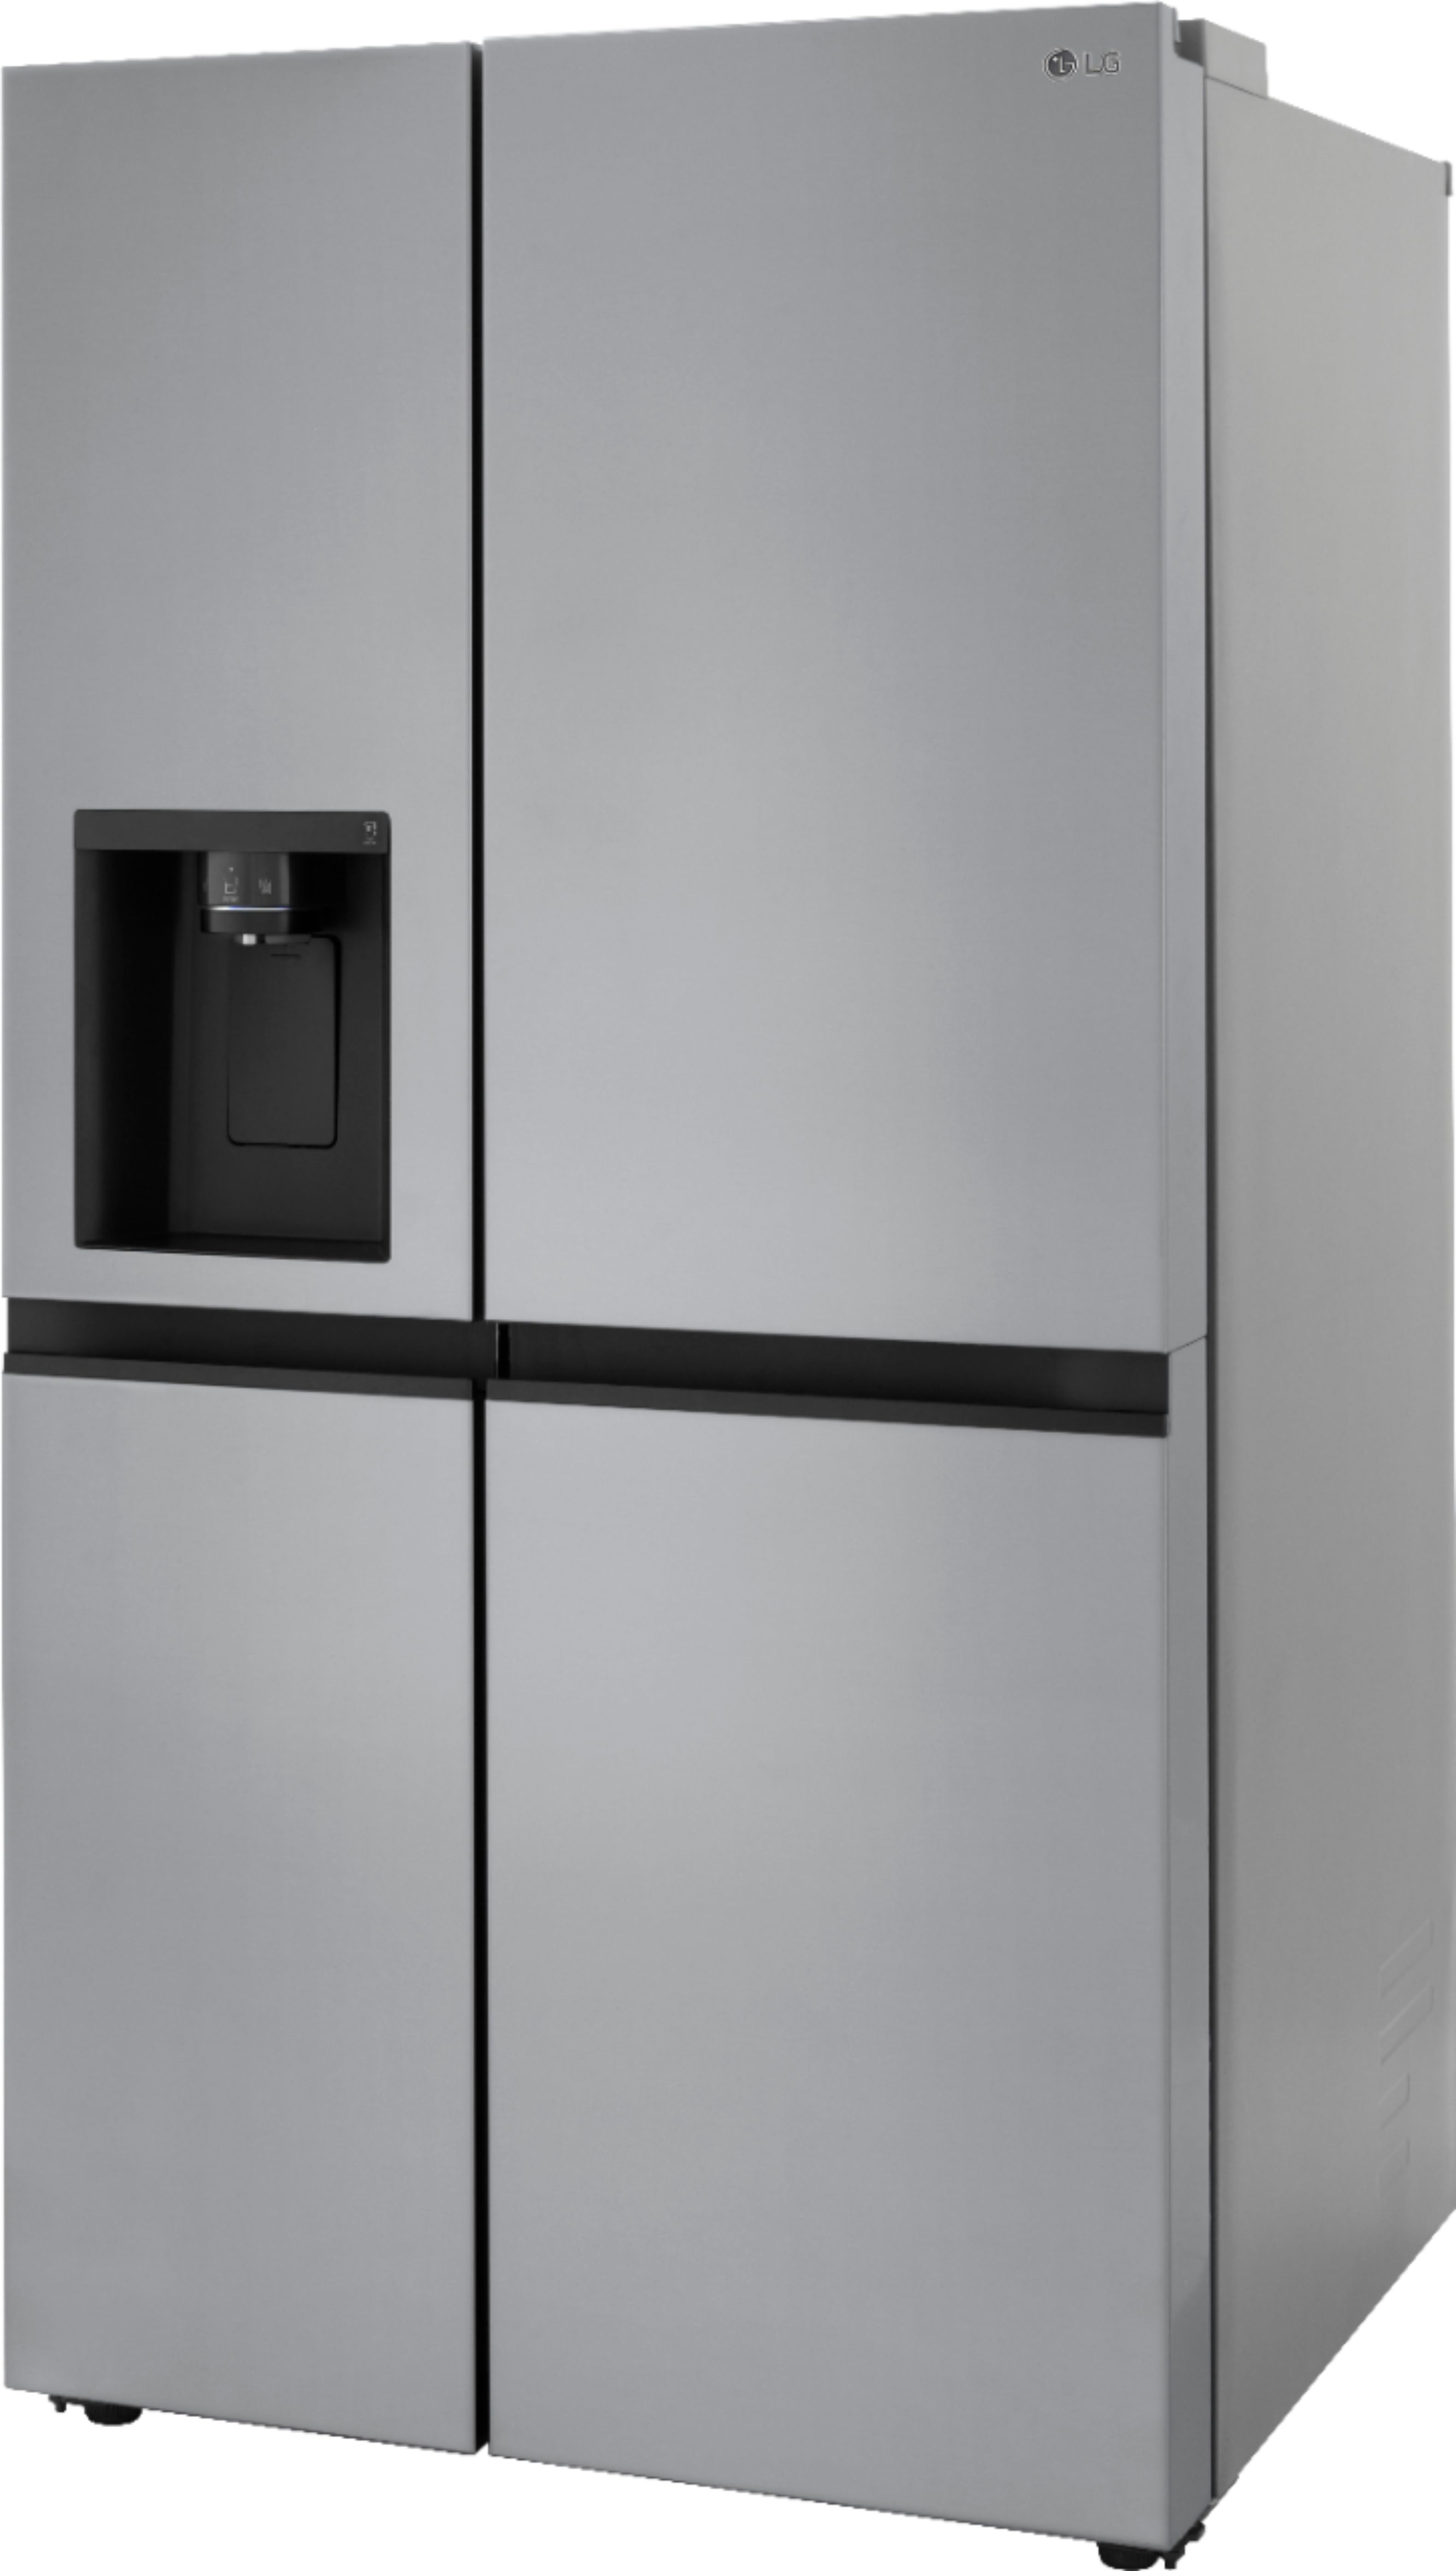 Left View: KitchenAid - 23.8 Cu. Ft. French Door Counter-Depth Refrigerator - Black Stainless Steel